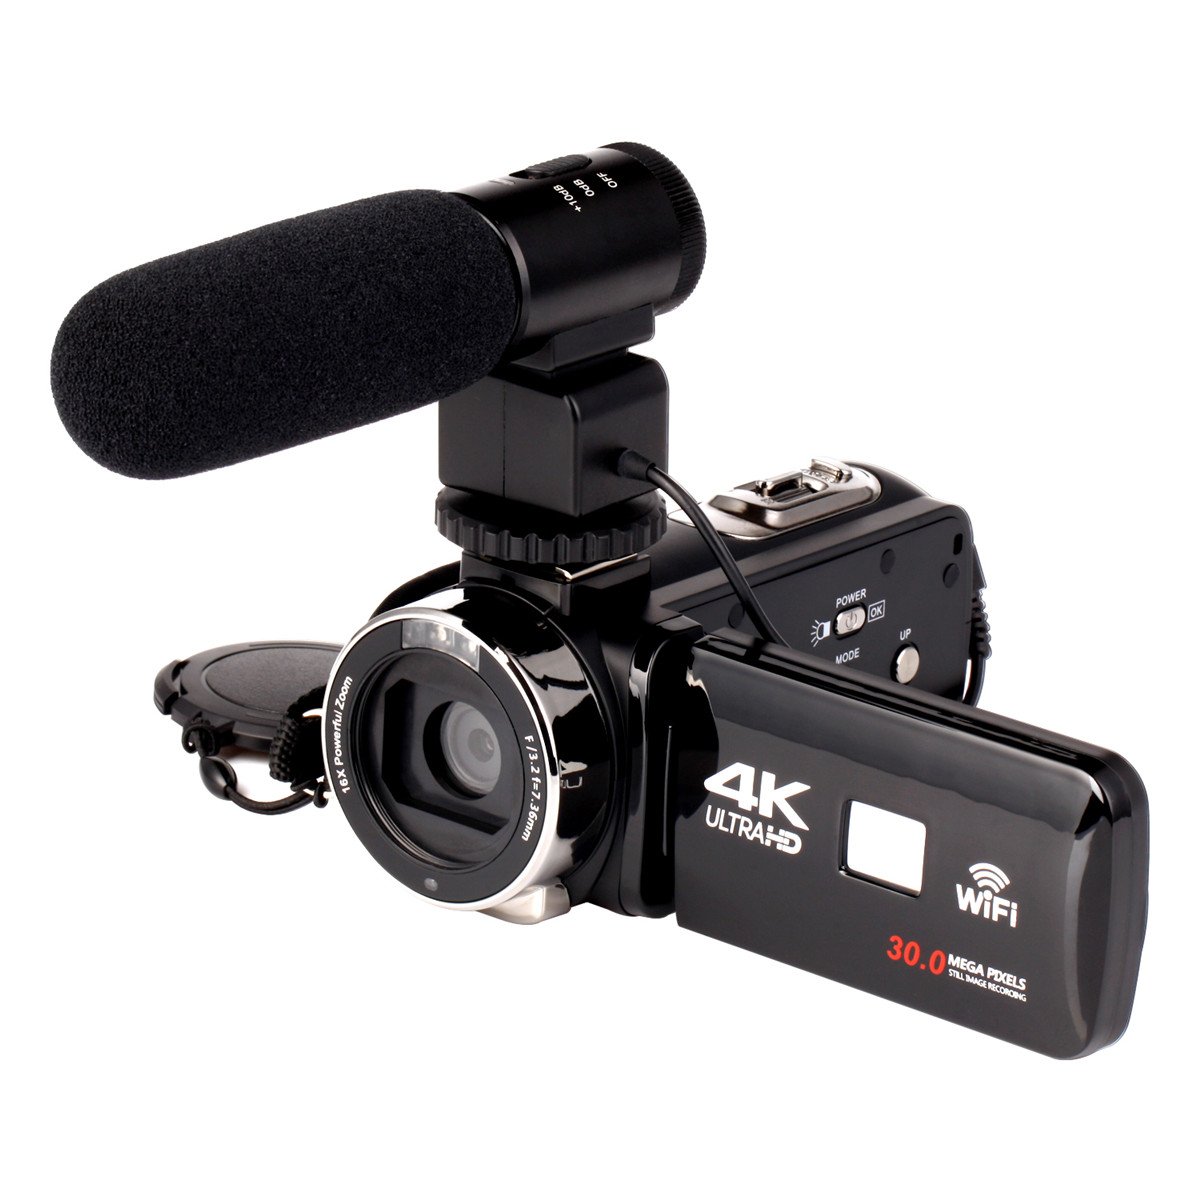 4K WiFi Ultra HD 1080P 16X ZOOM Digital Video Camera DV Camcorder with Lens and Microphone 1